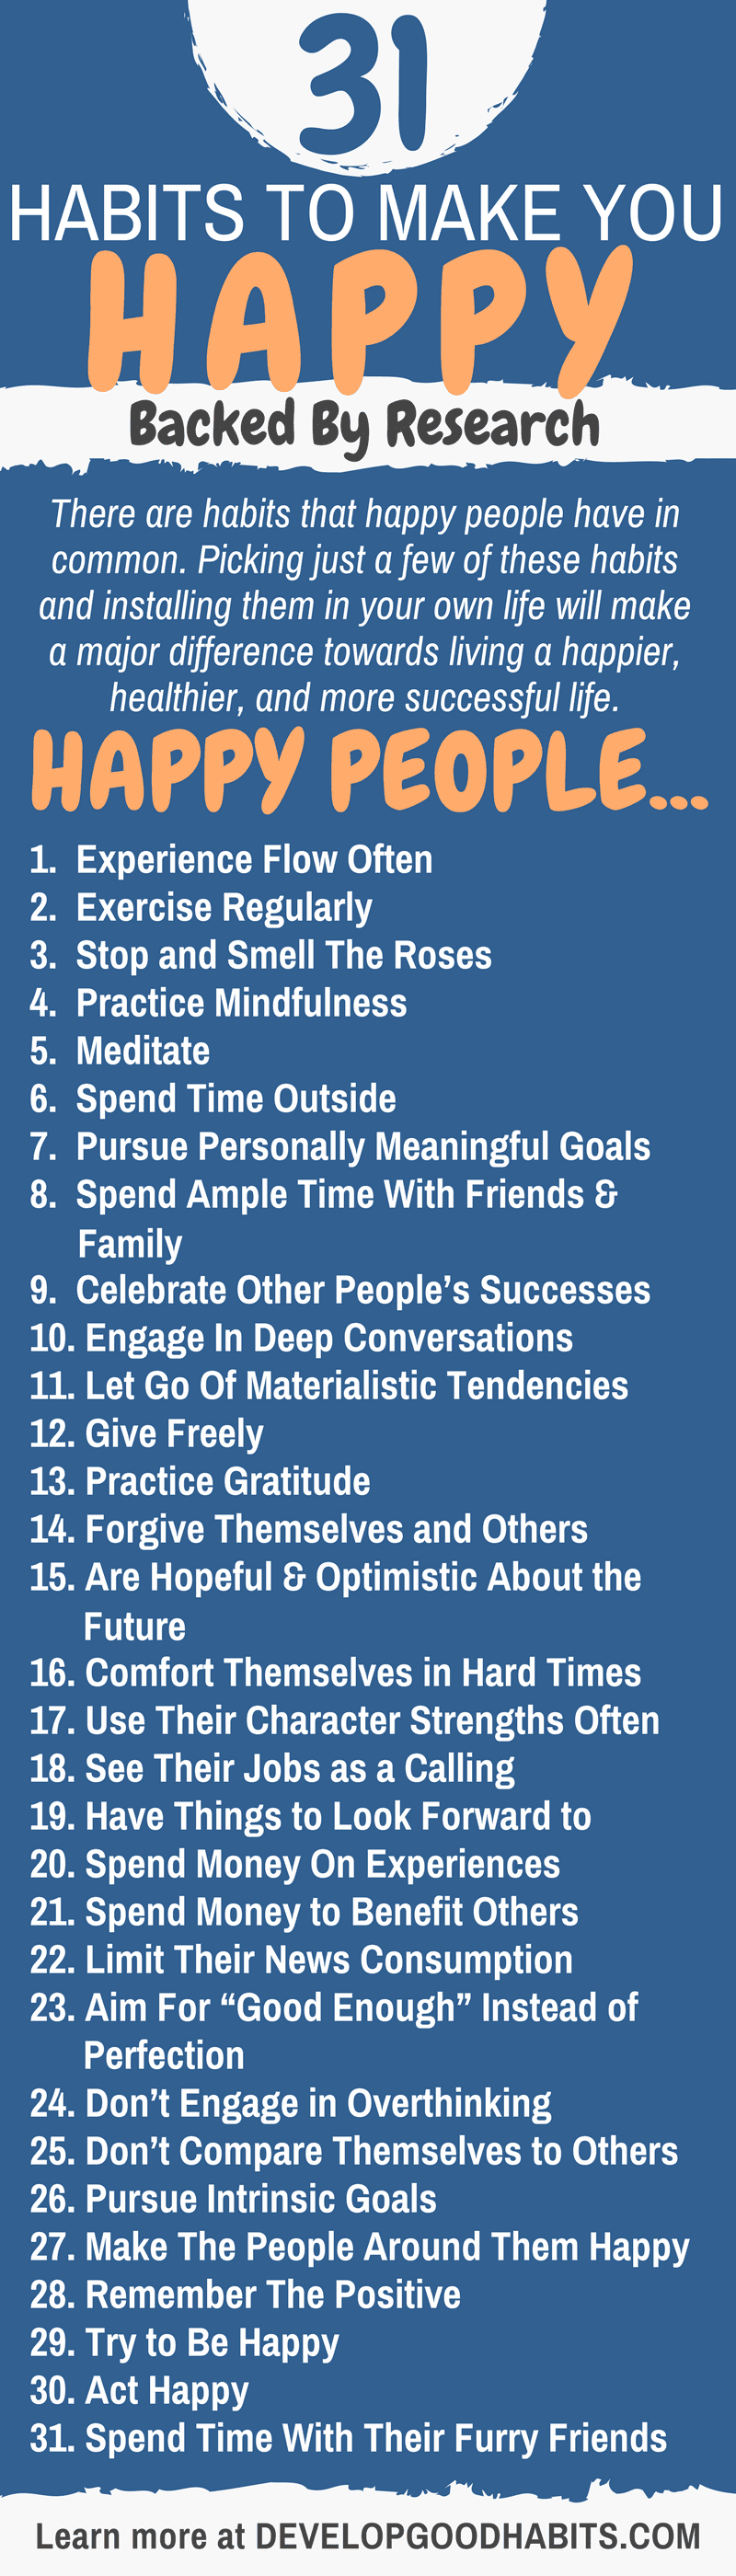 31 Habits of Happy People - Backed by Science & Psychology